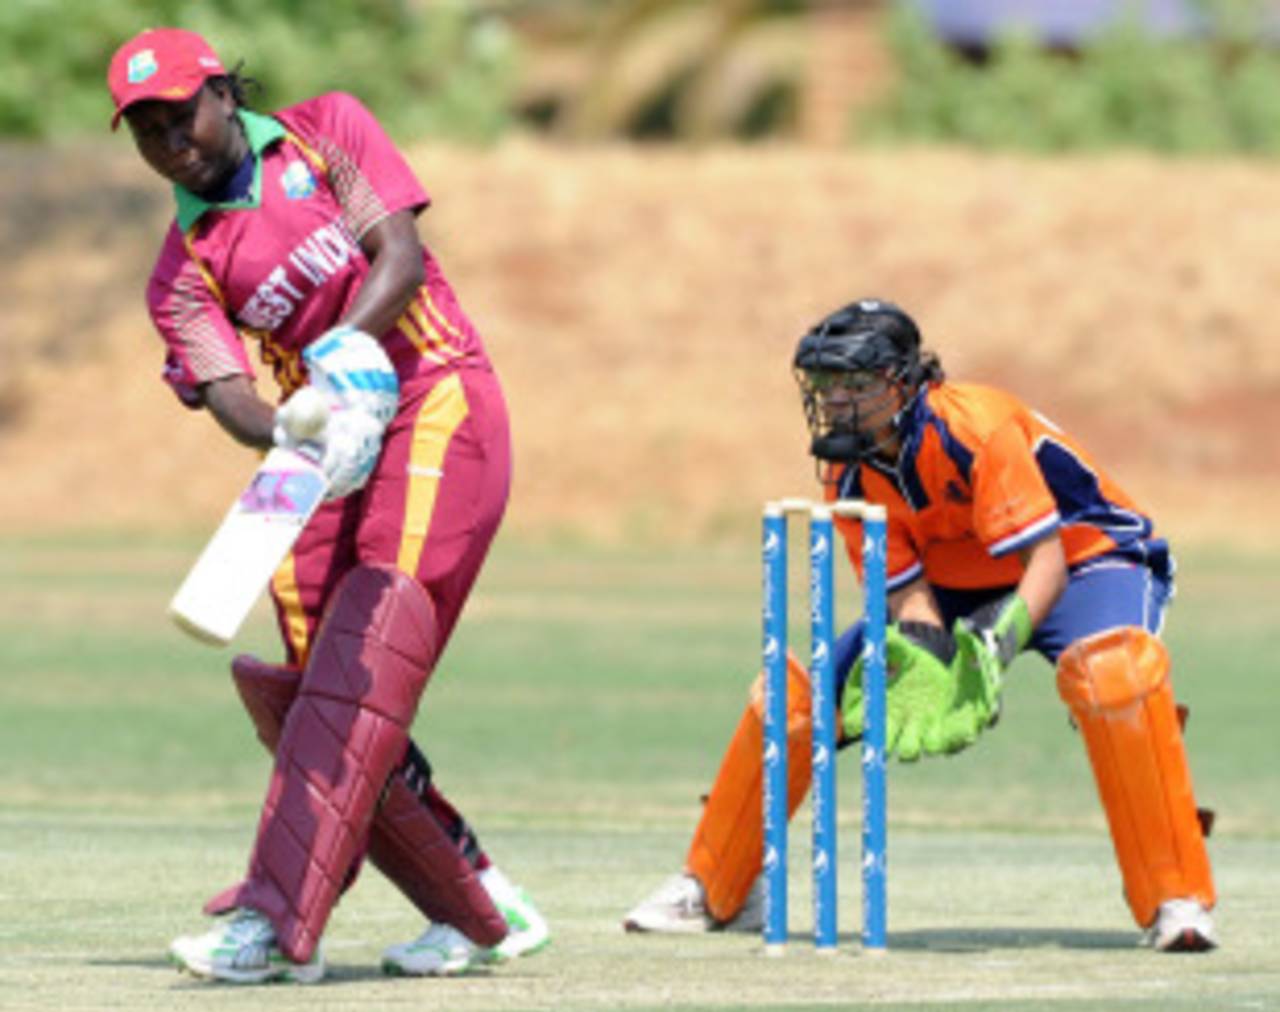 Stafanie Taylor struck 15 fours and a six during her powerful innings, West Indies Women v Netherlands Women, ICC Women's Cricket Challenge, Potchefstroom, October 6, 2010